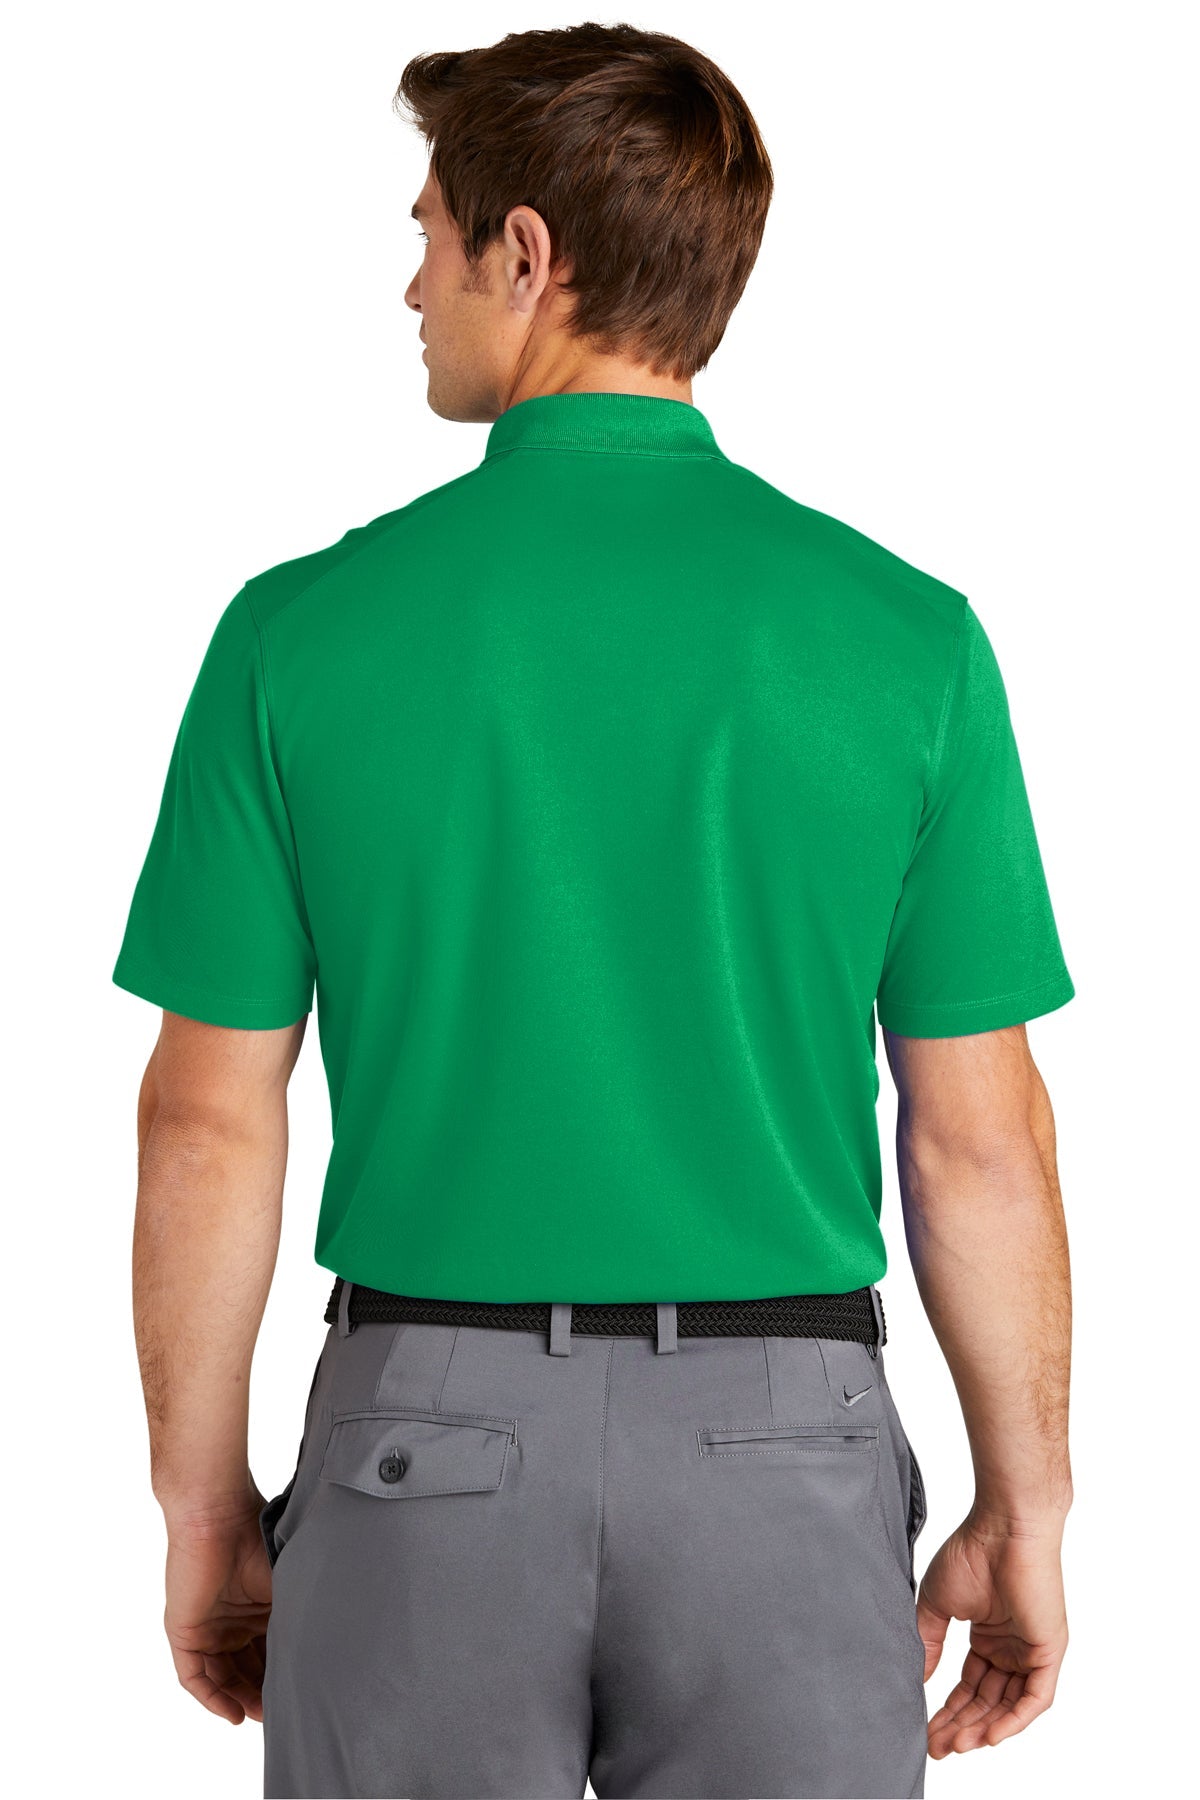 Nike Dri-FIT Micro Pique Customized Polos, Lucid Green